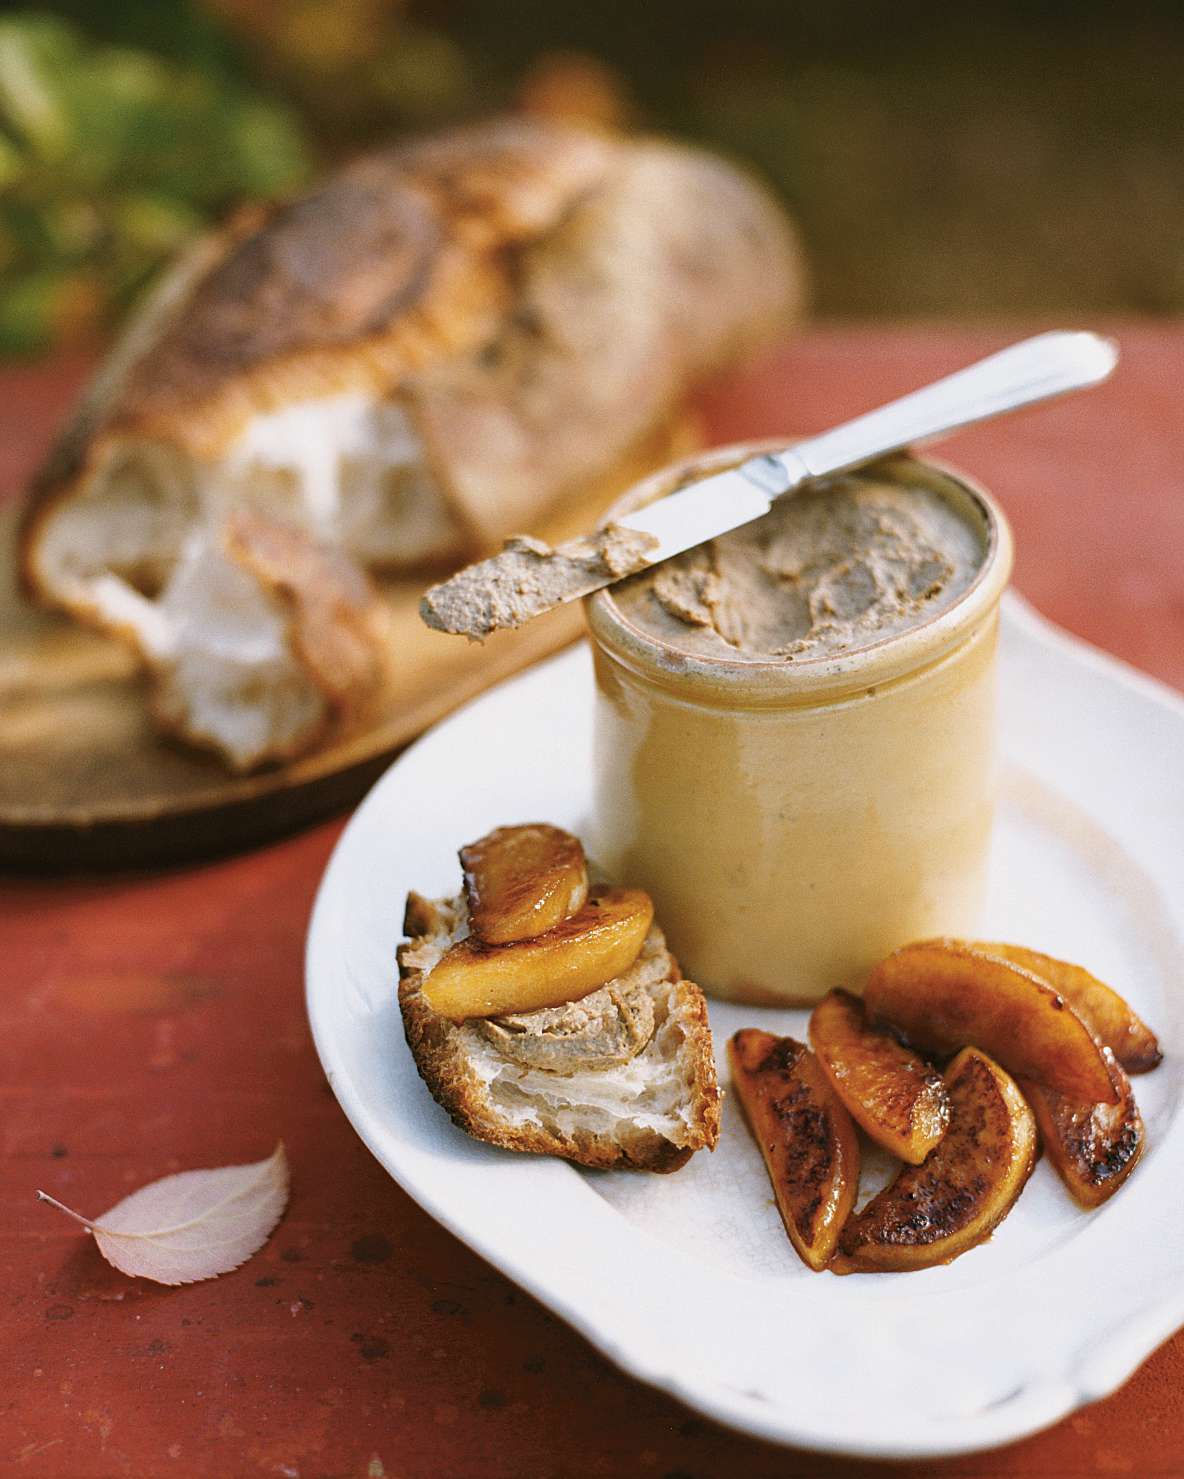 Bette's Chicken-Liver Pate with Sauteed Maple Syrup Apples